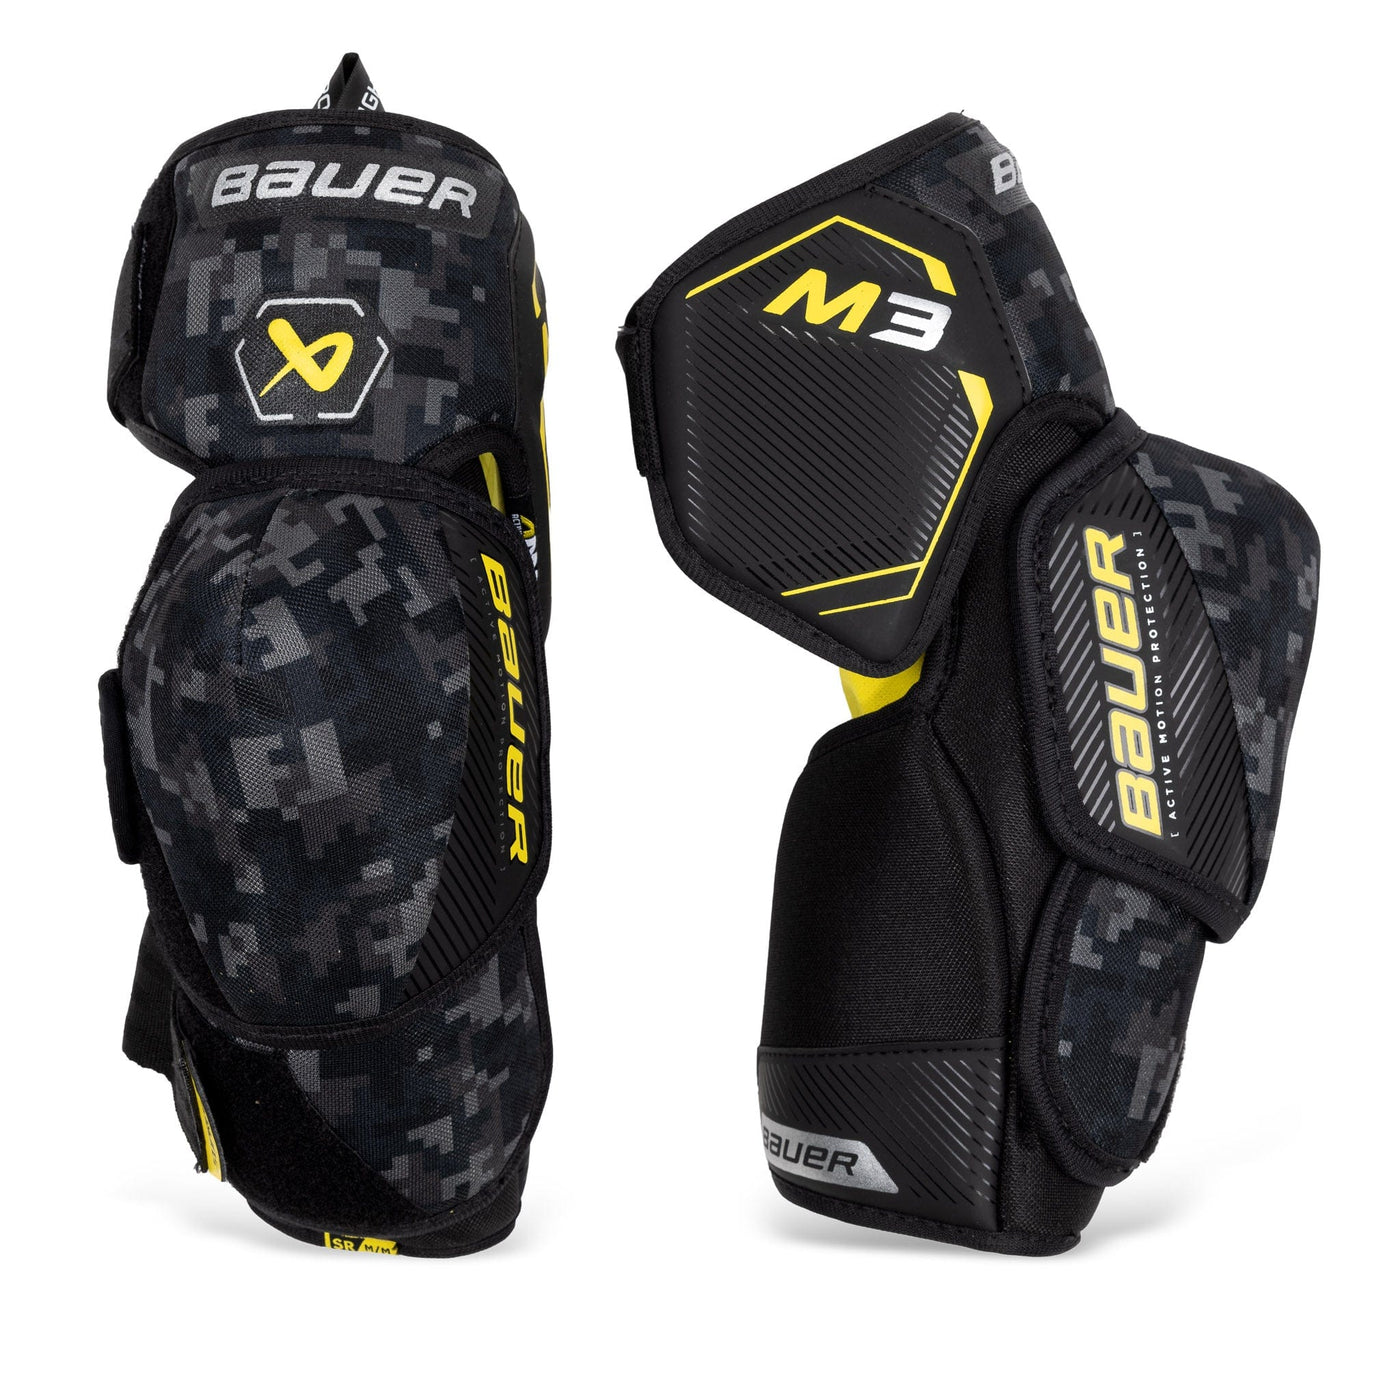 Bauer Supreme M3 Intermediate Hockey Elbow Pads - The Hockey Shop Source For Sports